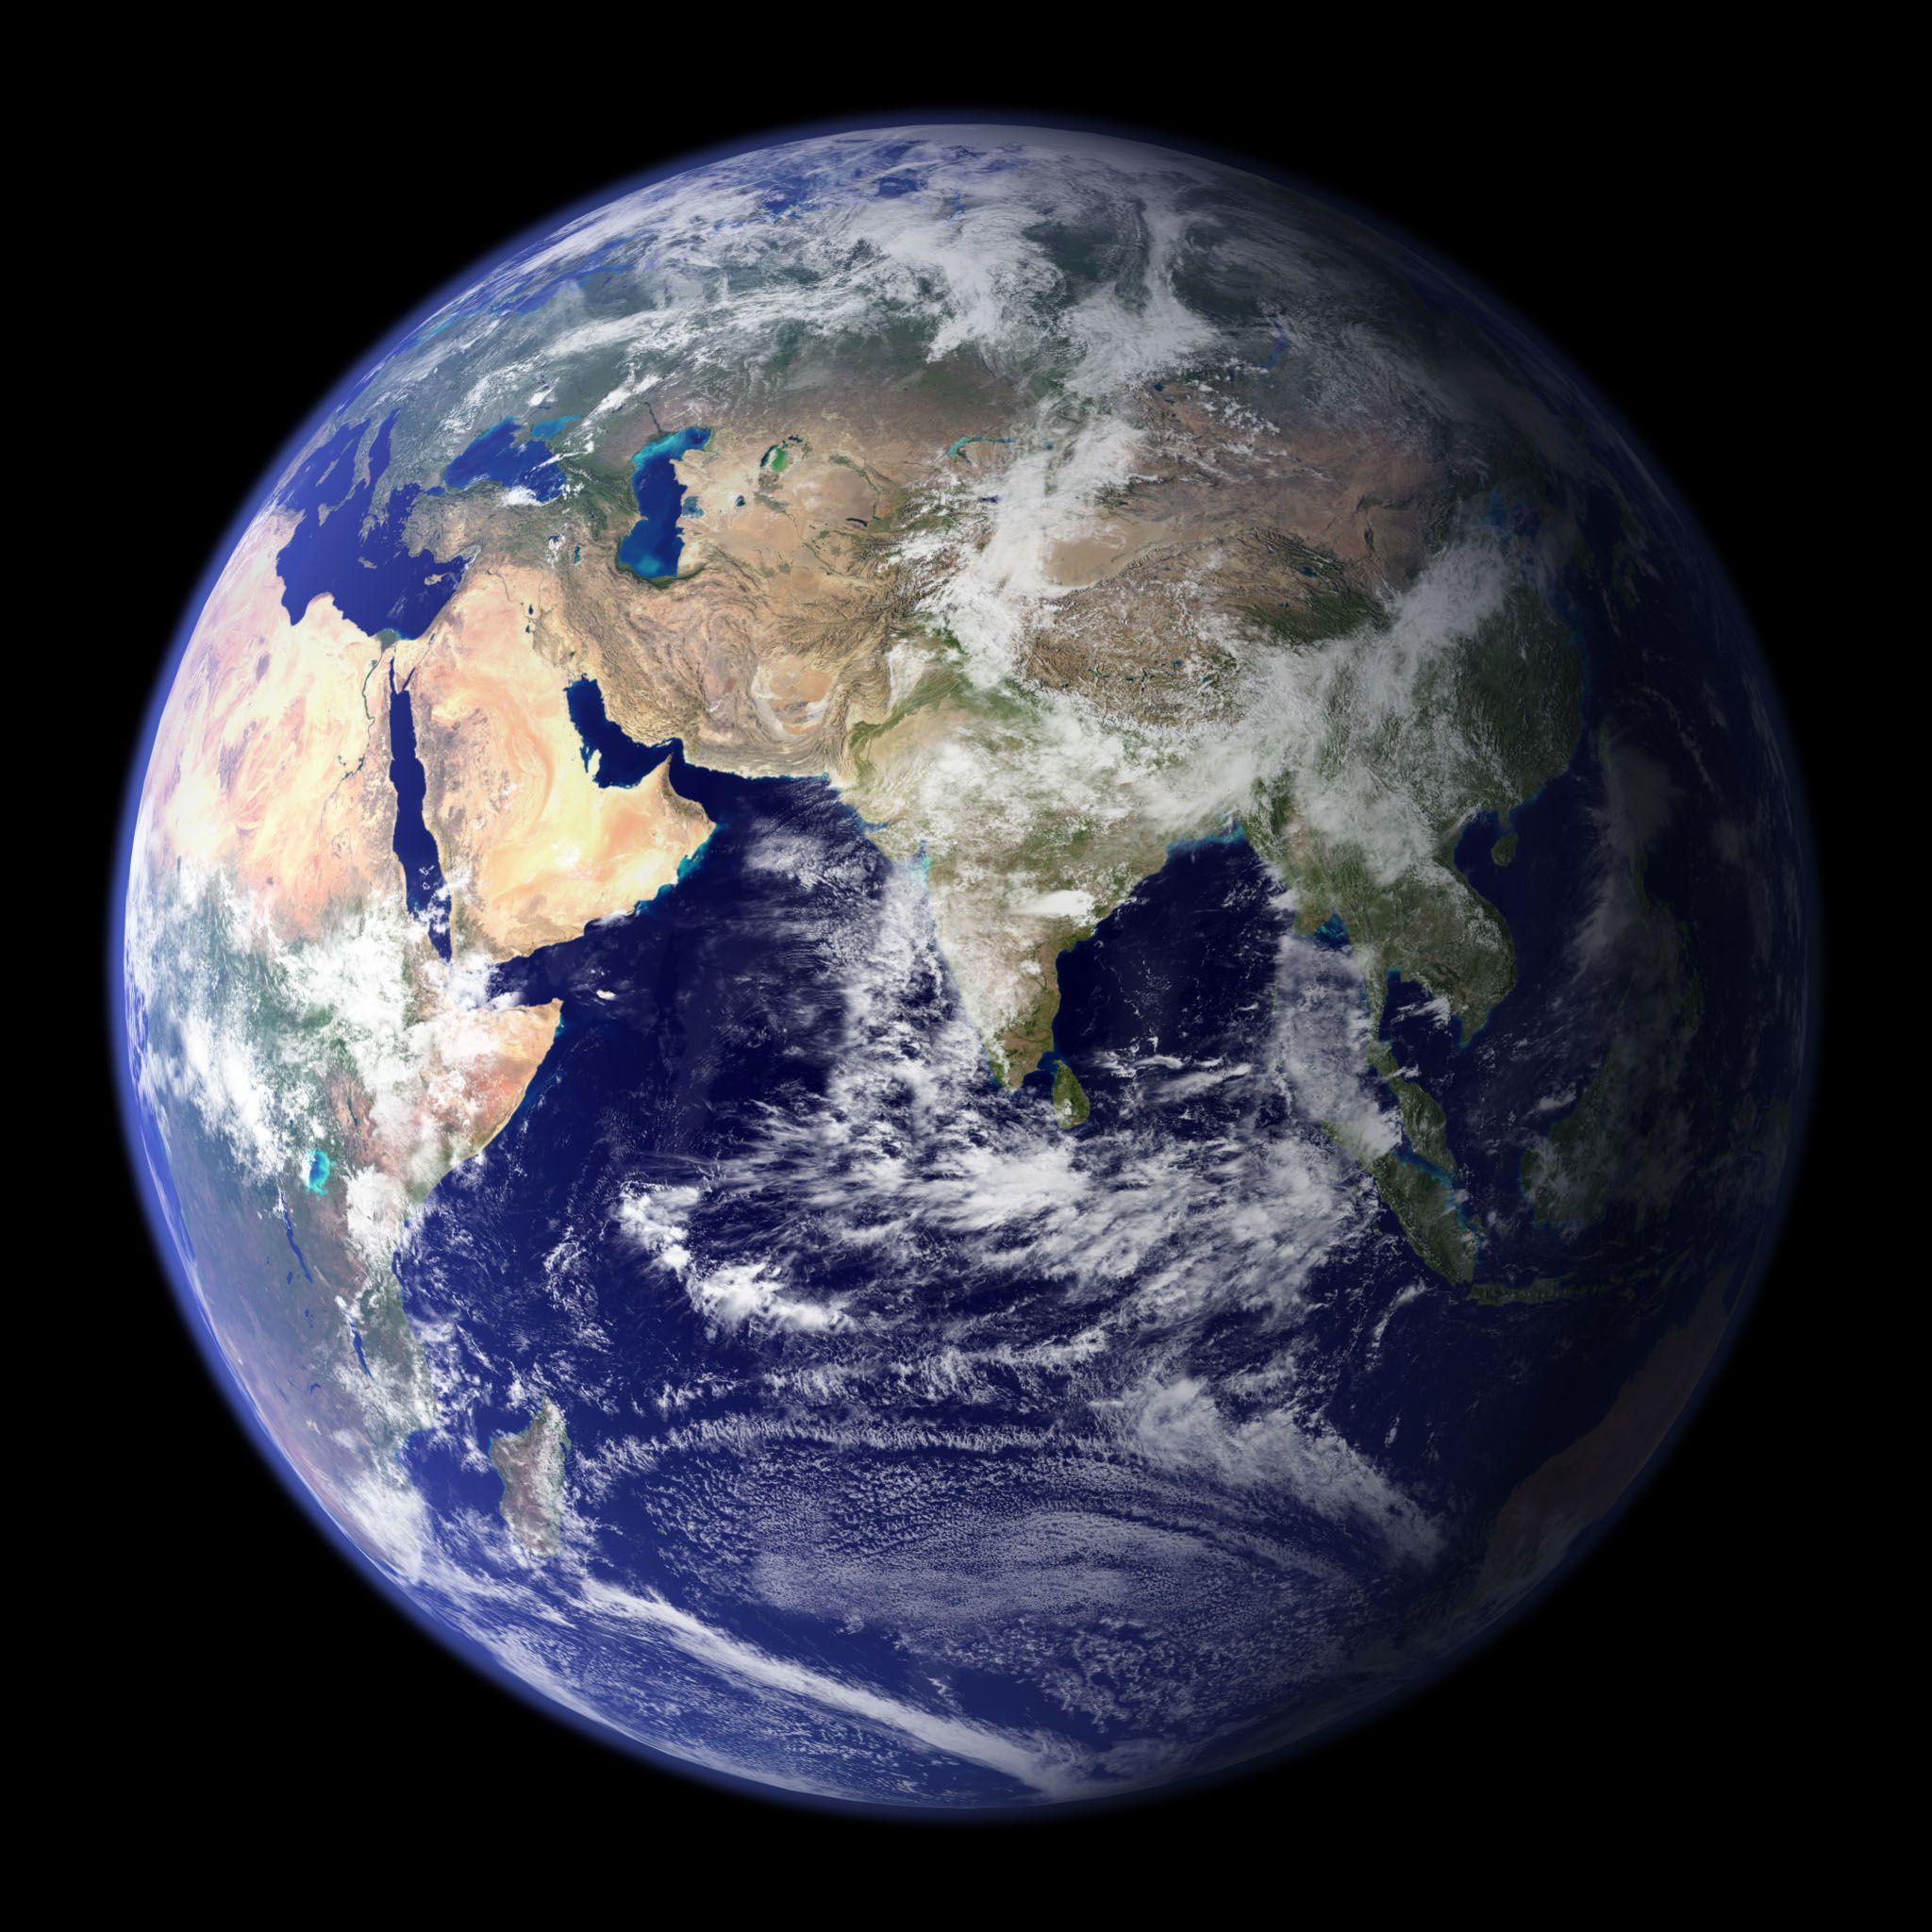 Composite image of the full Earth